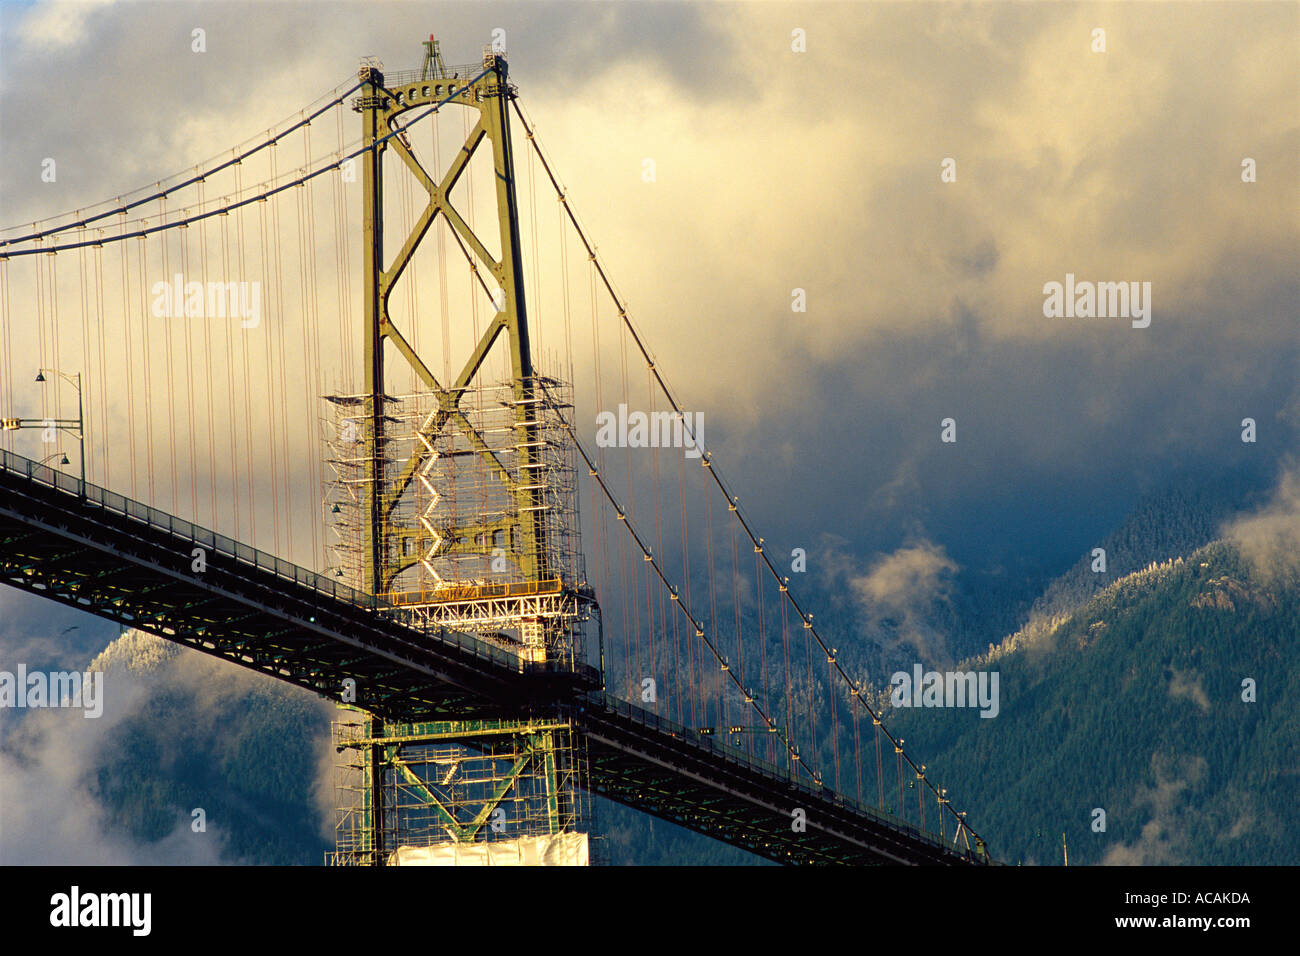 Lions Gate Bridge in golden light with clouds and snow dusted hills, Vancouver, British Columbia, Canada Stock Photo